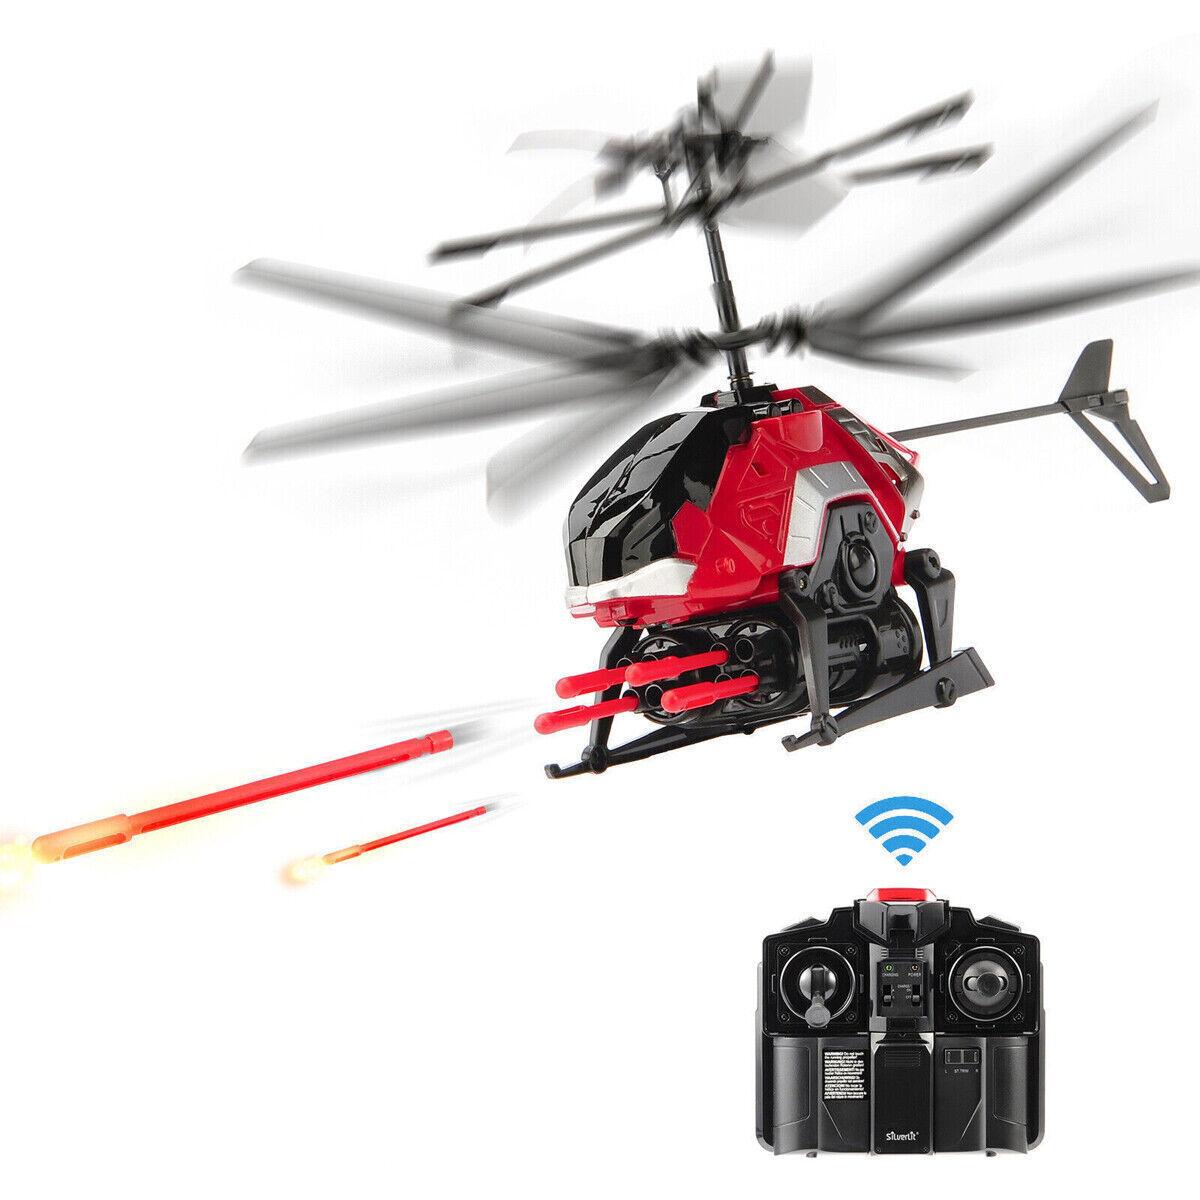 Rc Helicopter That Shoots Bbs: High-powered, BB-shooting RC helicopters bring the thrill of military simulation games to life for outdoor enthusiasts.